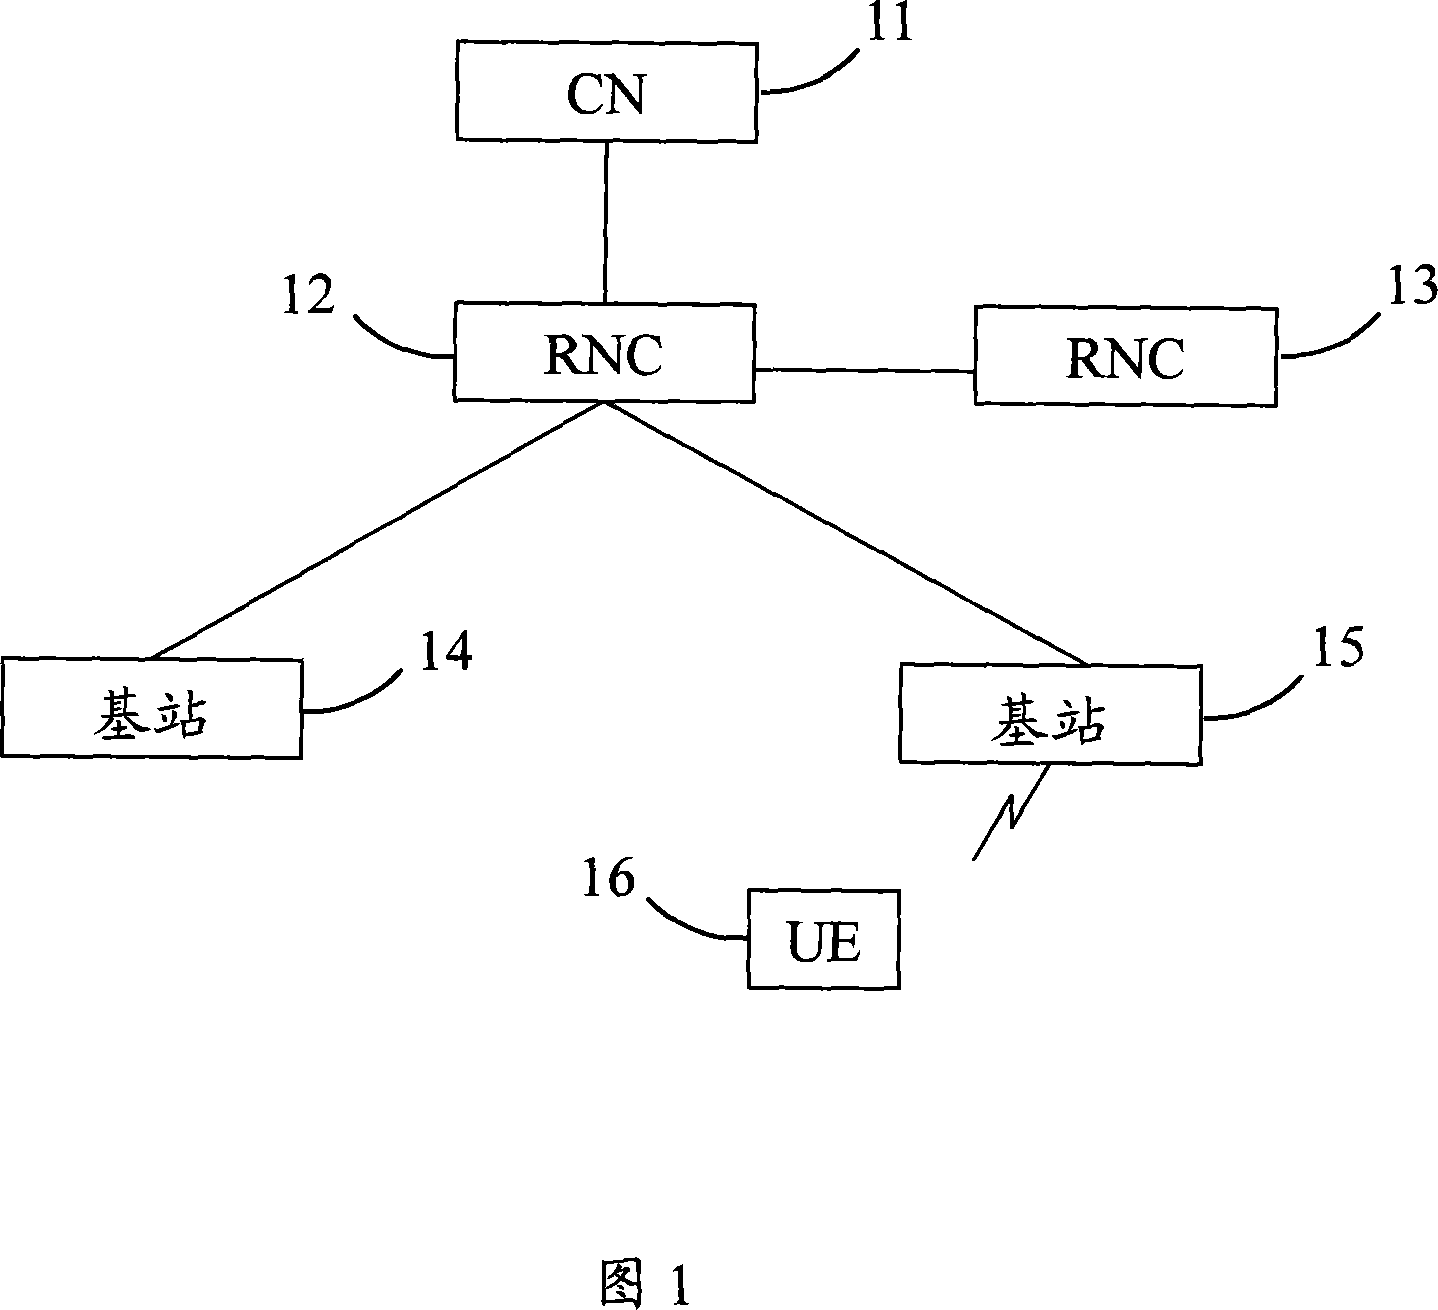 A failure processing method, system and device for wireless network controller